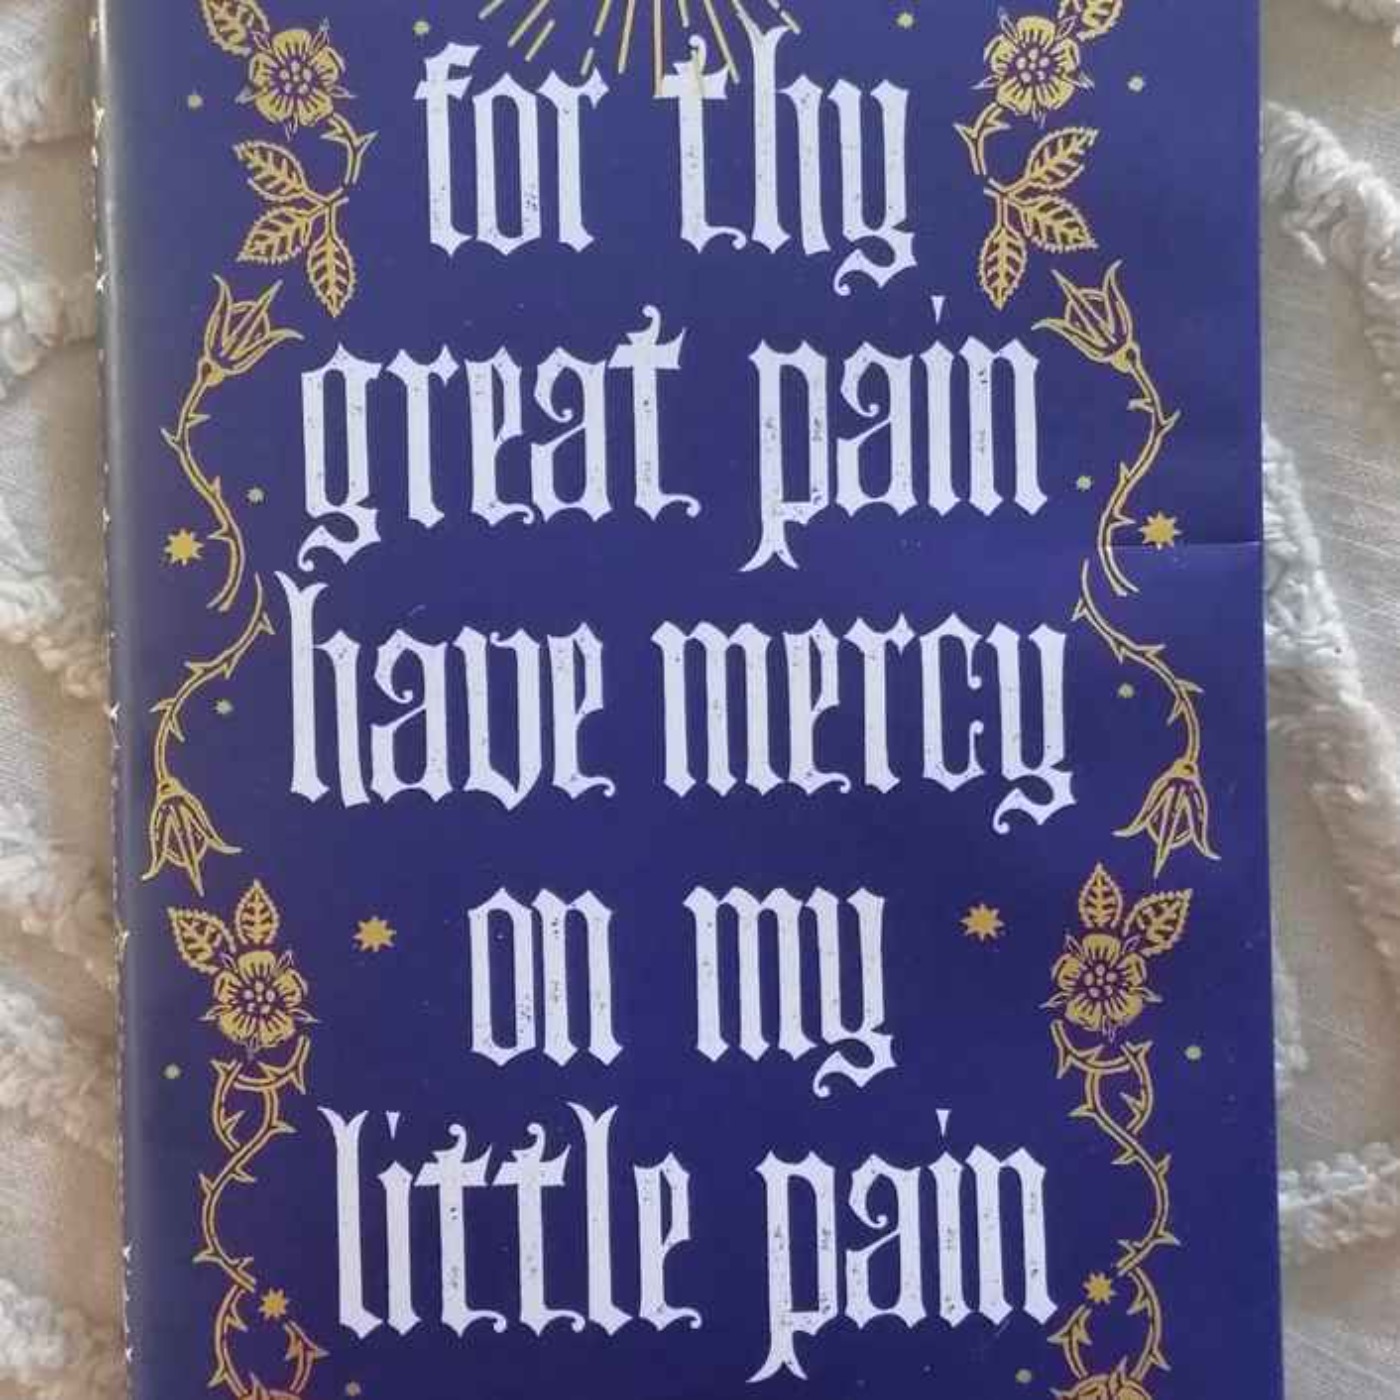 cover art for Little Atoms 801 - Victoria MacKenzie's for Thy Great Pain Have Mercy on my Little Pain